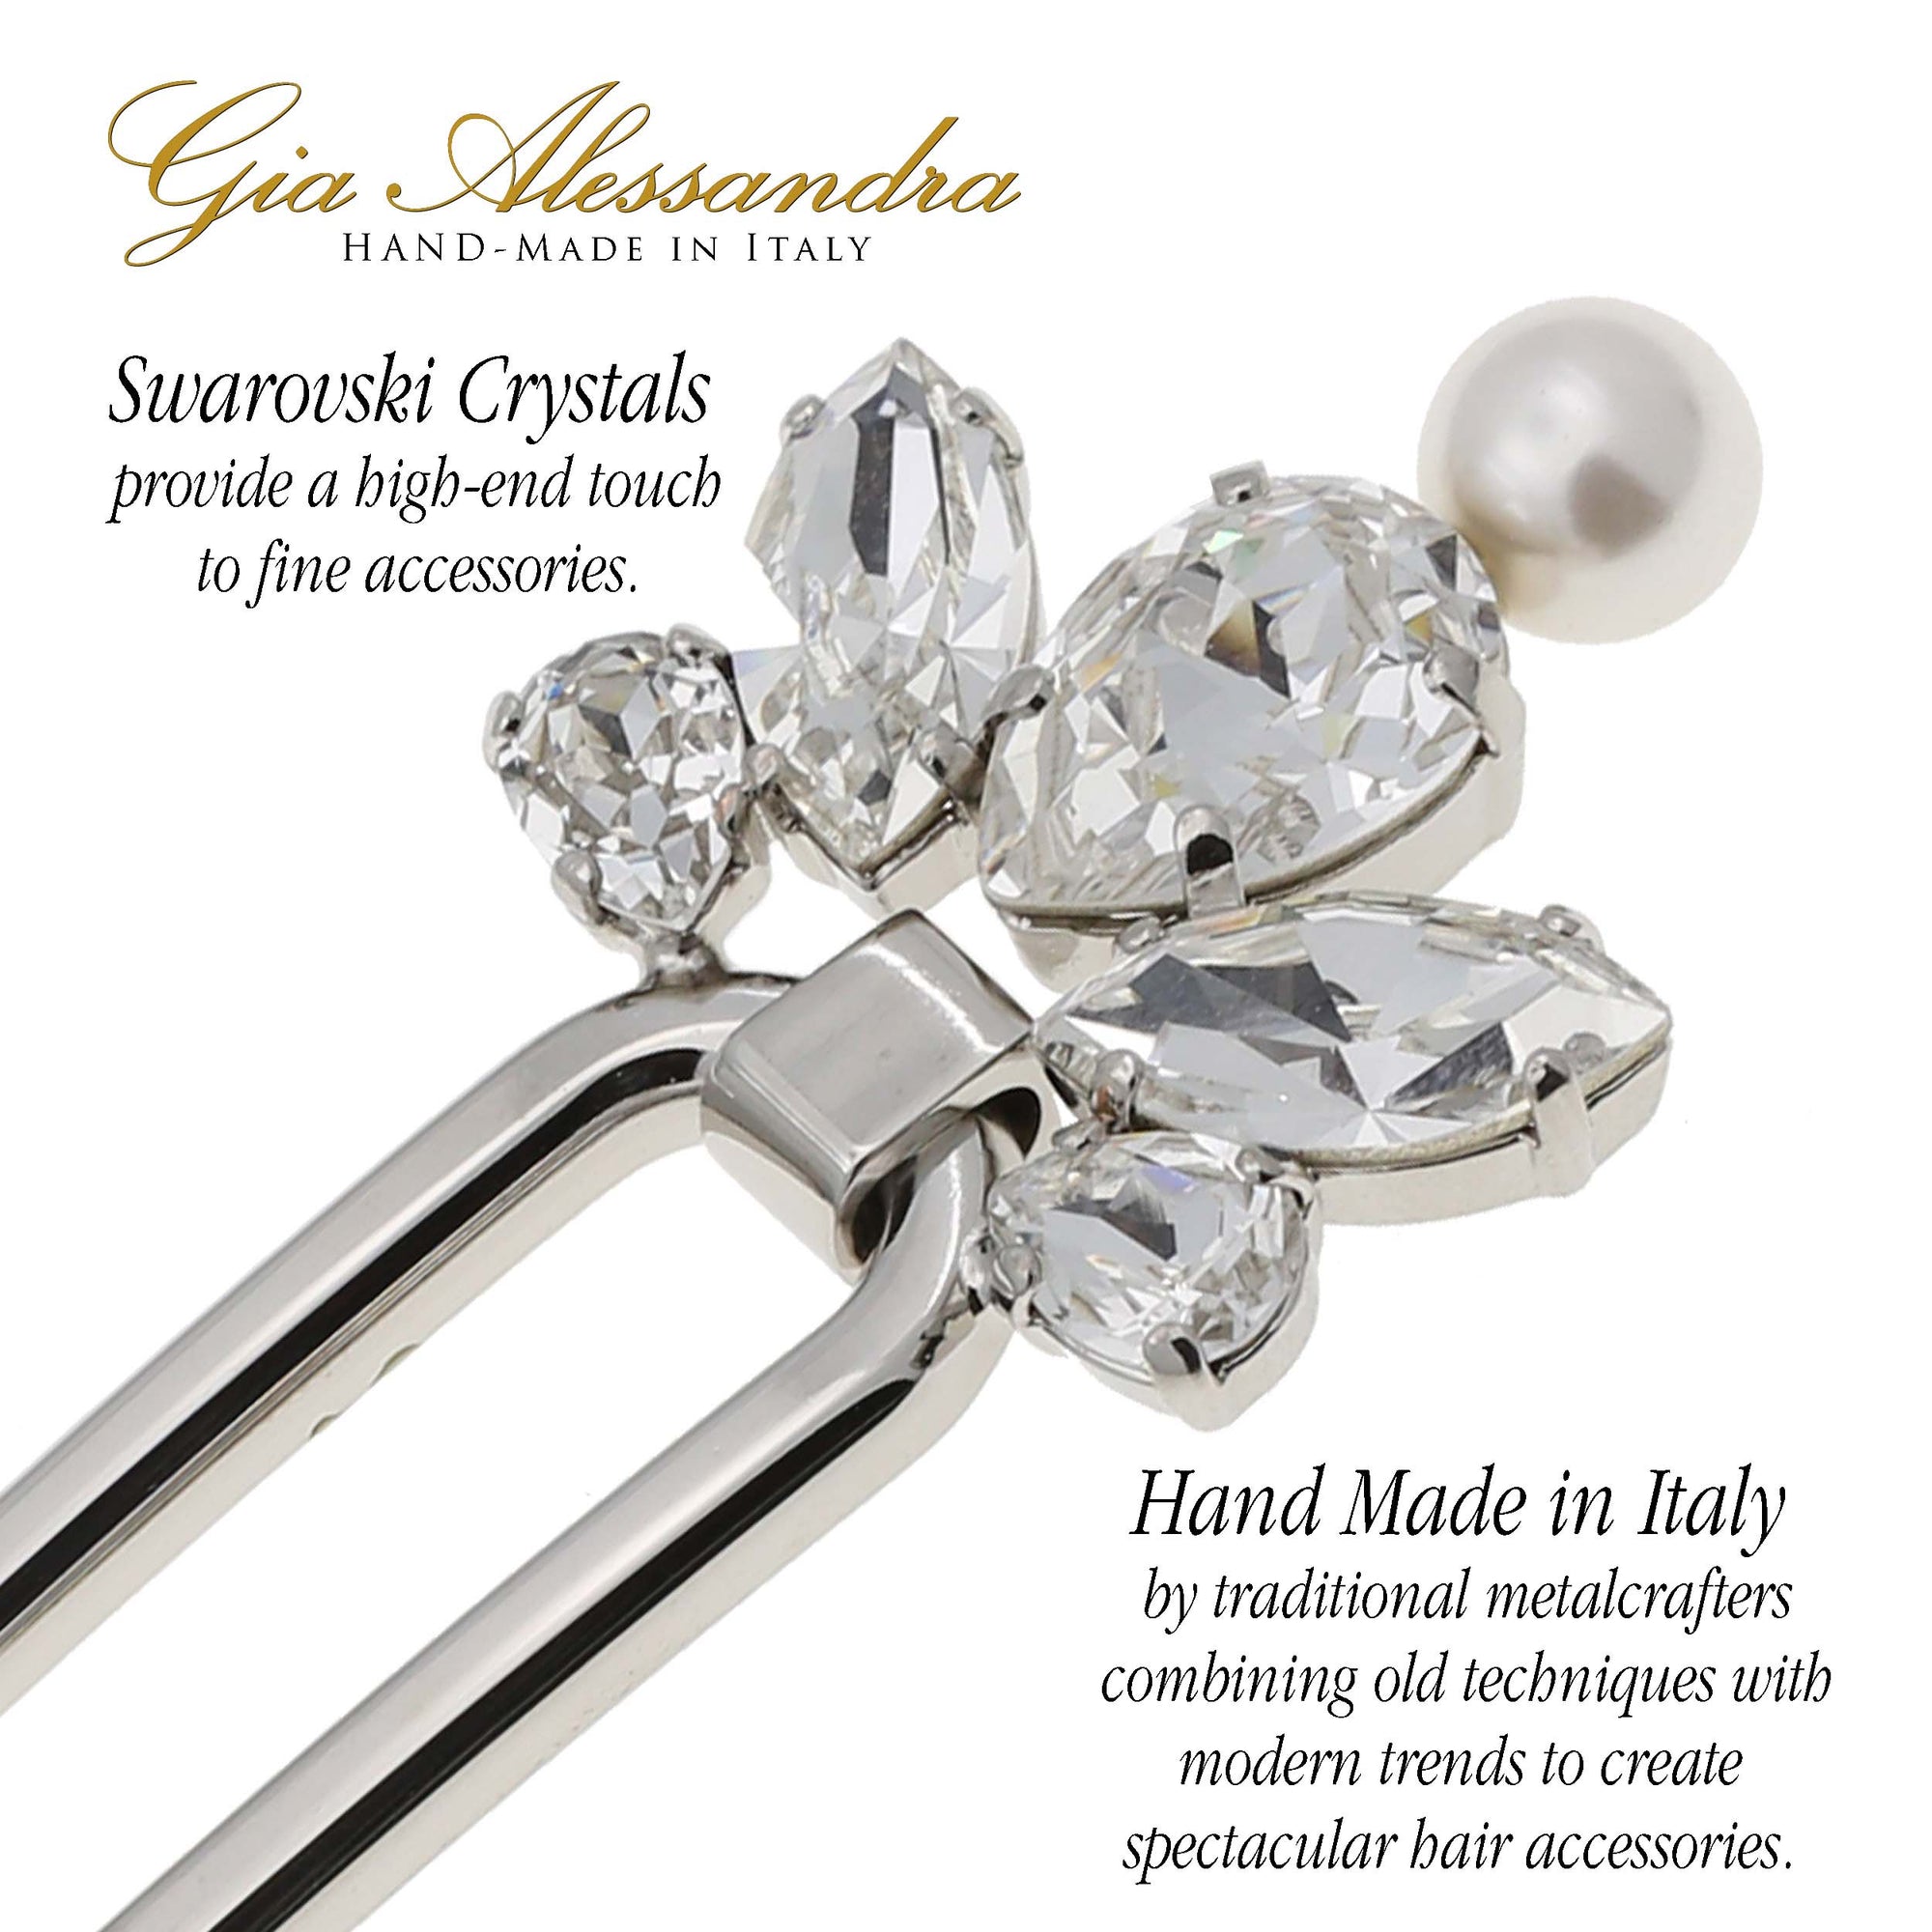 Gia Alessandra GA261 (4.75") Large Italian Handmade Silver French Twist Stick Pins with White Swarovsky Crystals & Pearls